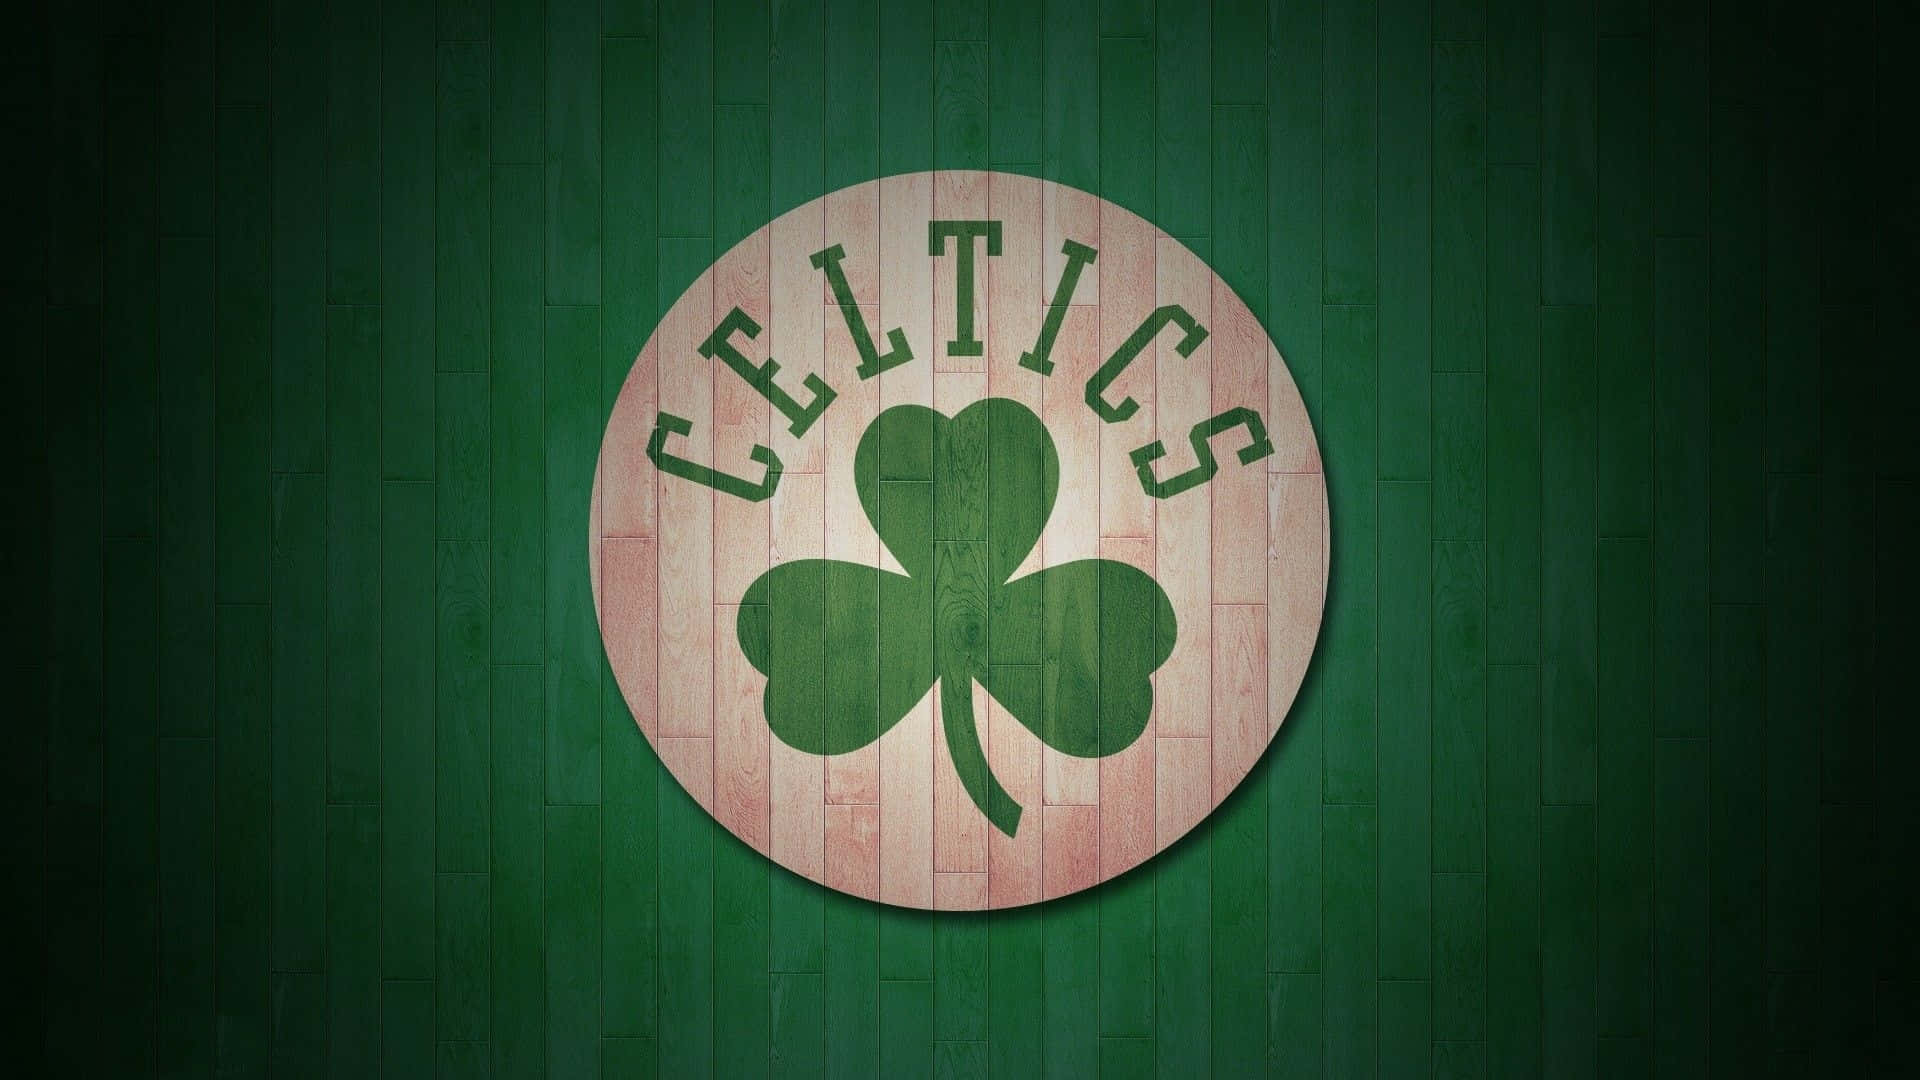 Show your support for the Boston Celtics with this awesome logo! Wallpaper